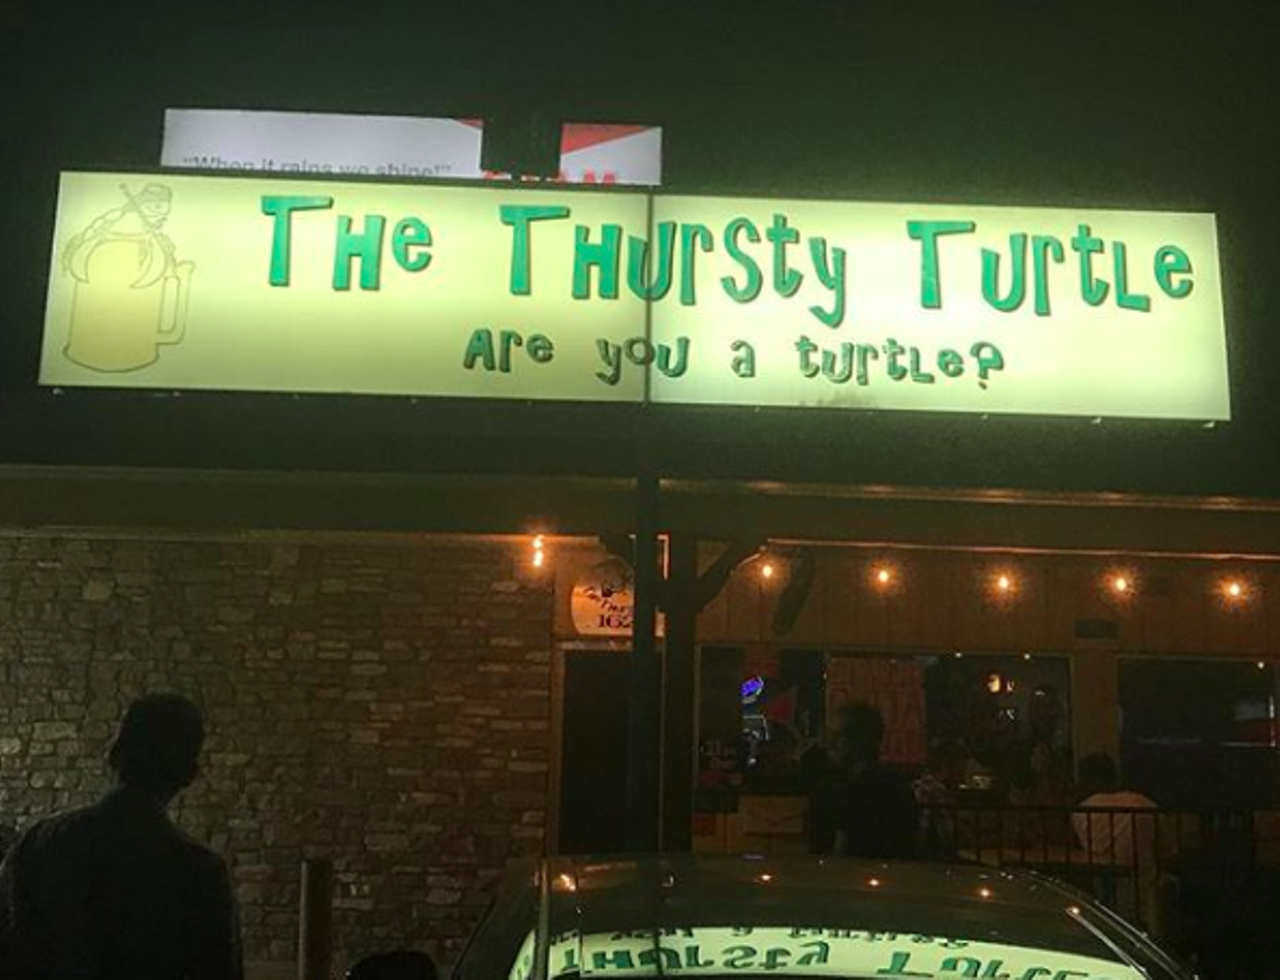 The Thursty Turtle
1626 NE Interstate 410 Loop, (210) 820-3600, facebook.com/TheThurstyTurtle
Don’t let the framed giant-ass turtle shell fool you, this place is dope AF. The drinks are known for being strong and the vibe is consistently chill, so just sidle up to that well-loved bar top for a drink or two. 
Photo via Instagram / jonwiener